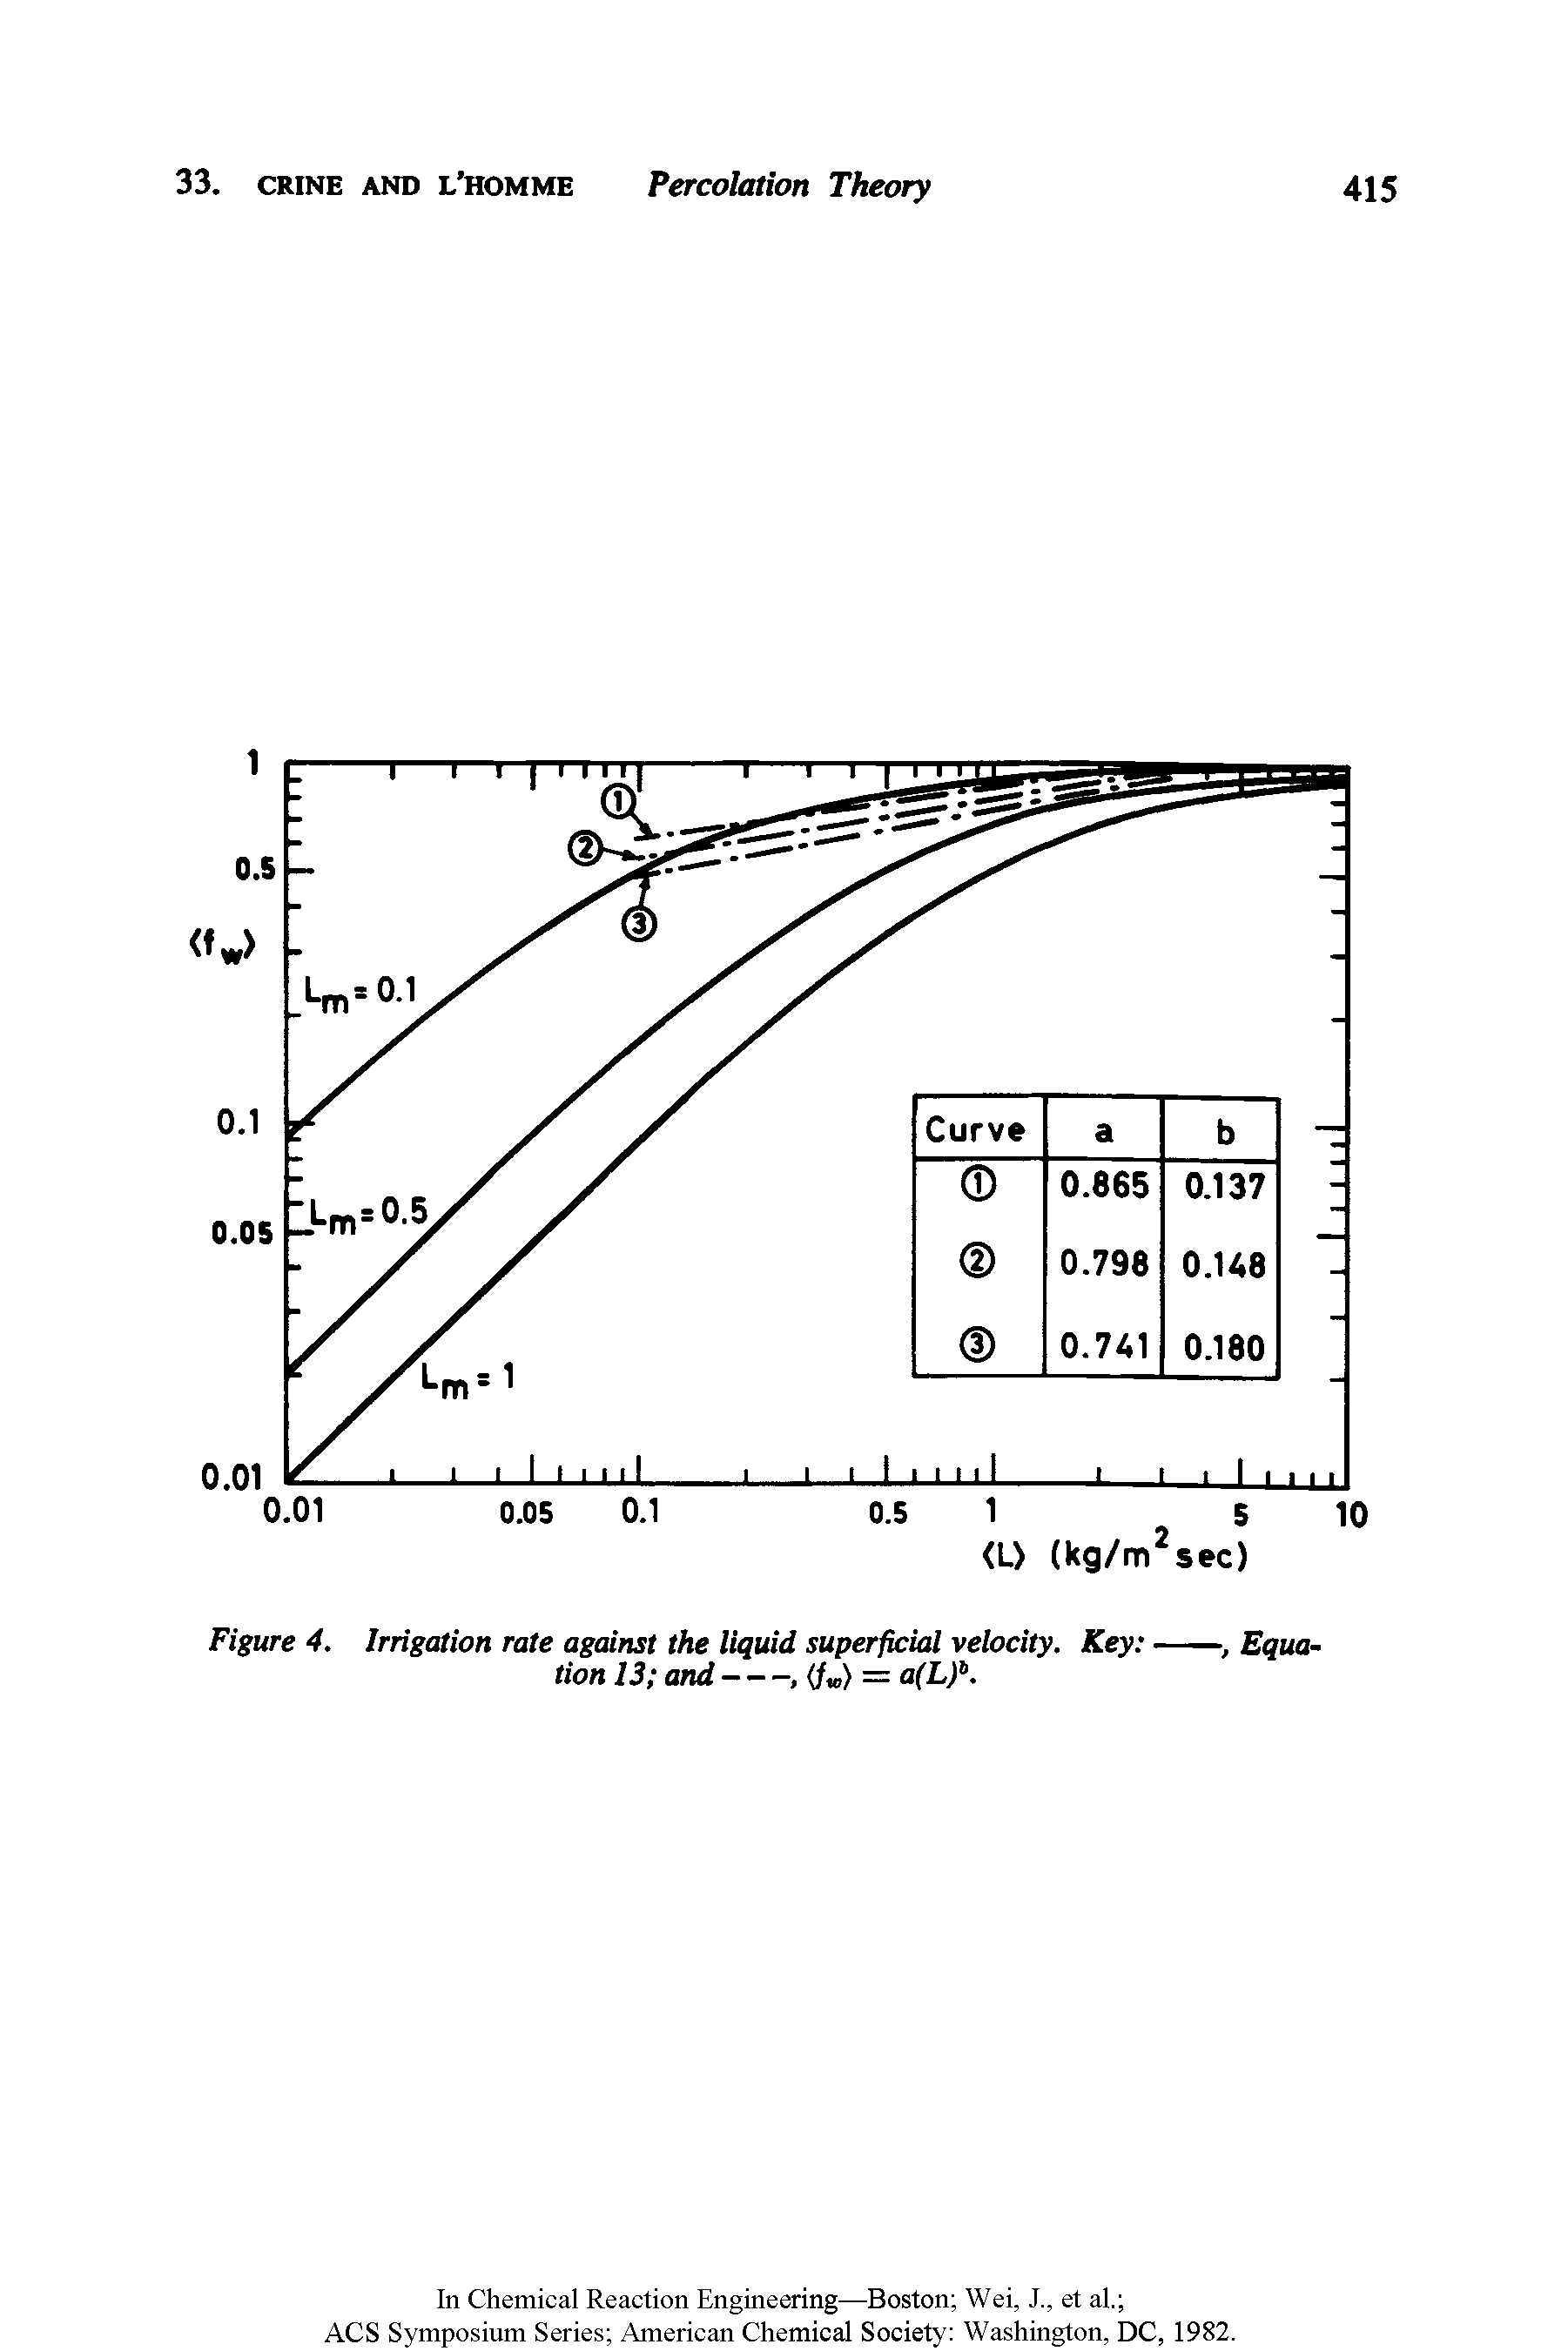 Figure 4. Irrigation rate against the liquid superficial velocity. Key ------------, Equation 13 and-----------------------------------, </ ,) = a(L)t.